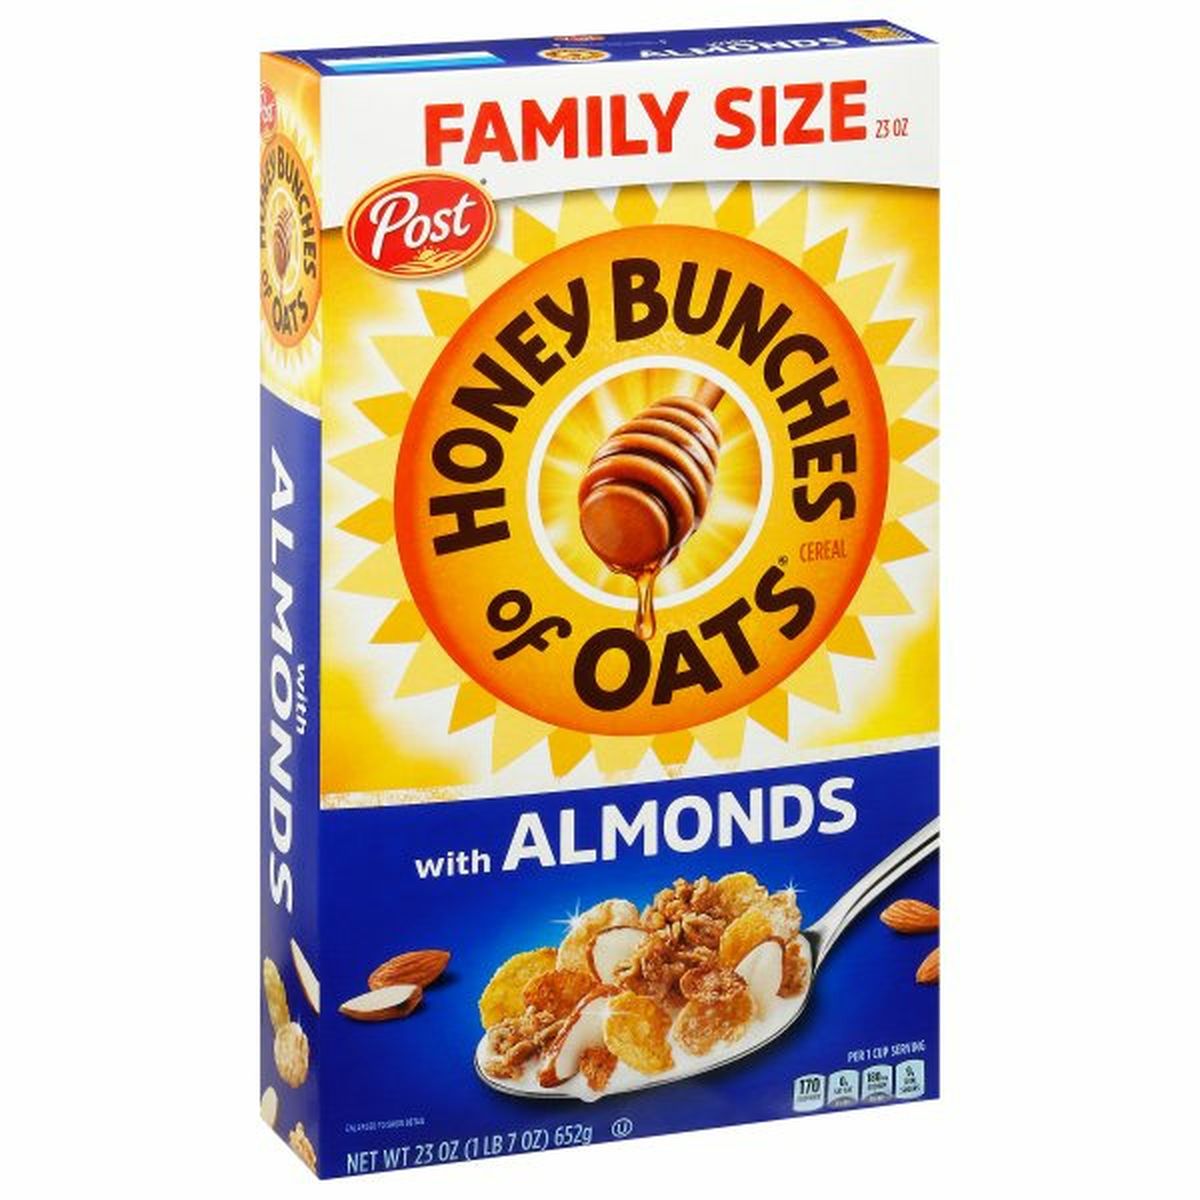 Calories in Post Cereal, with Almonds, Family Size